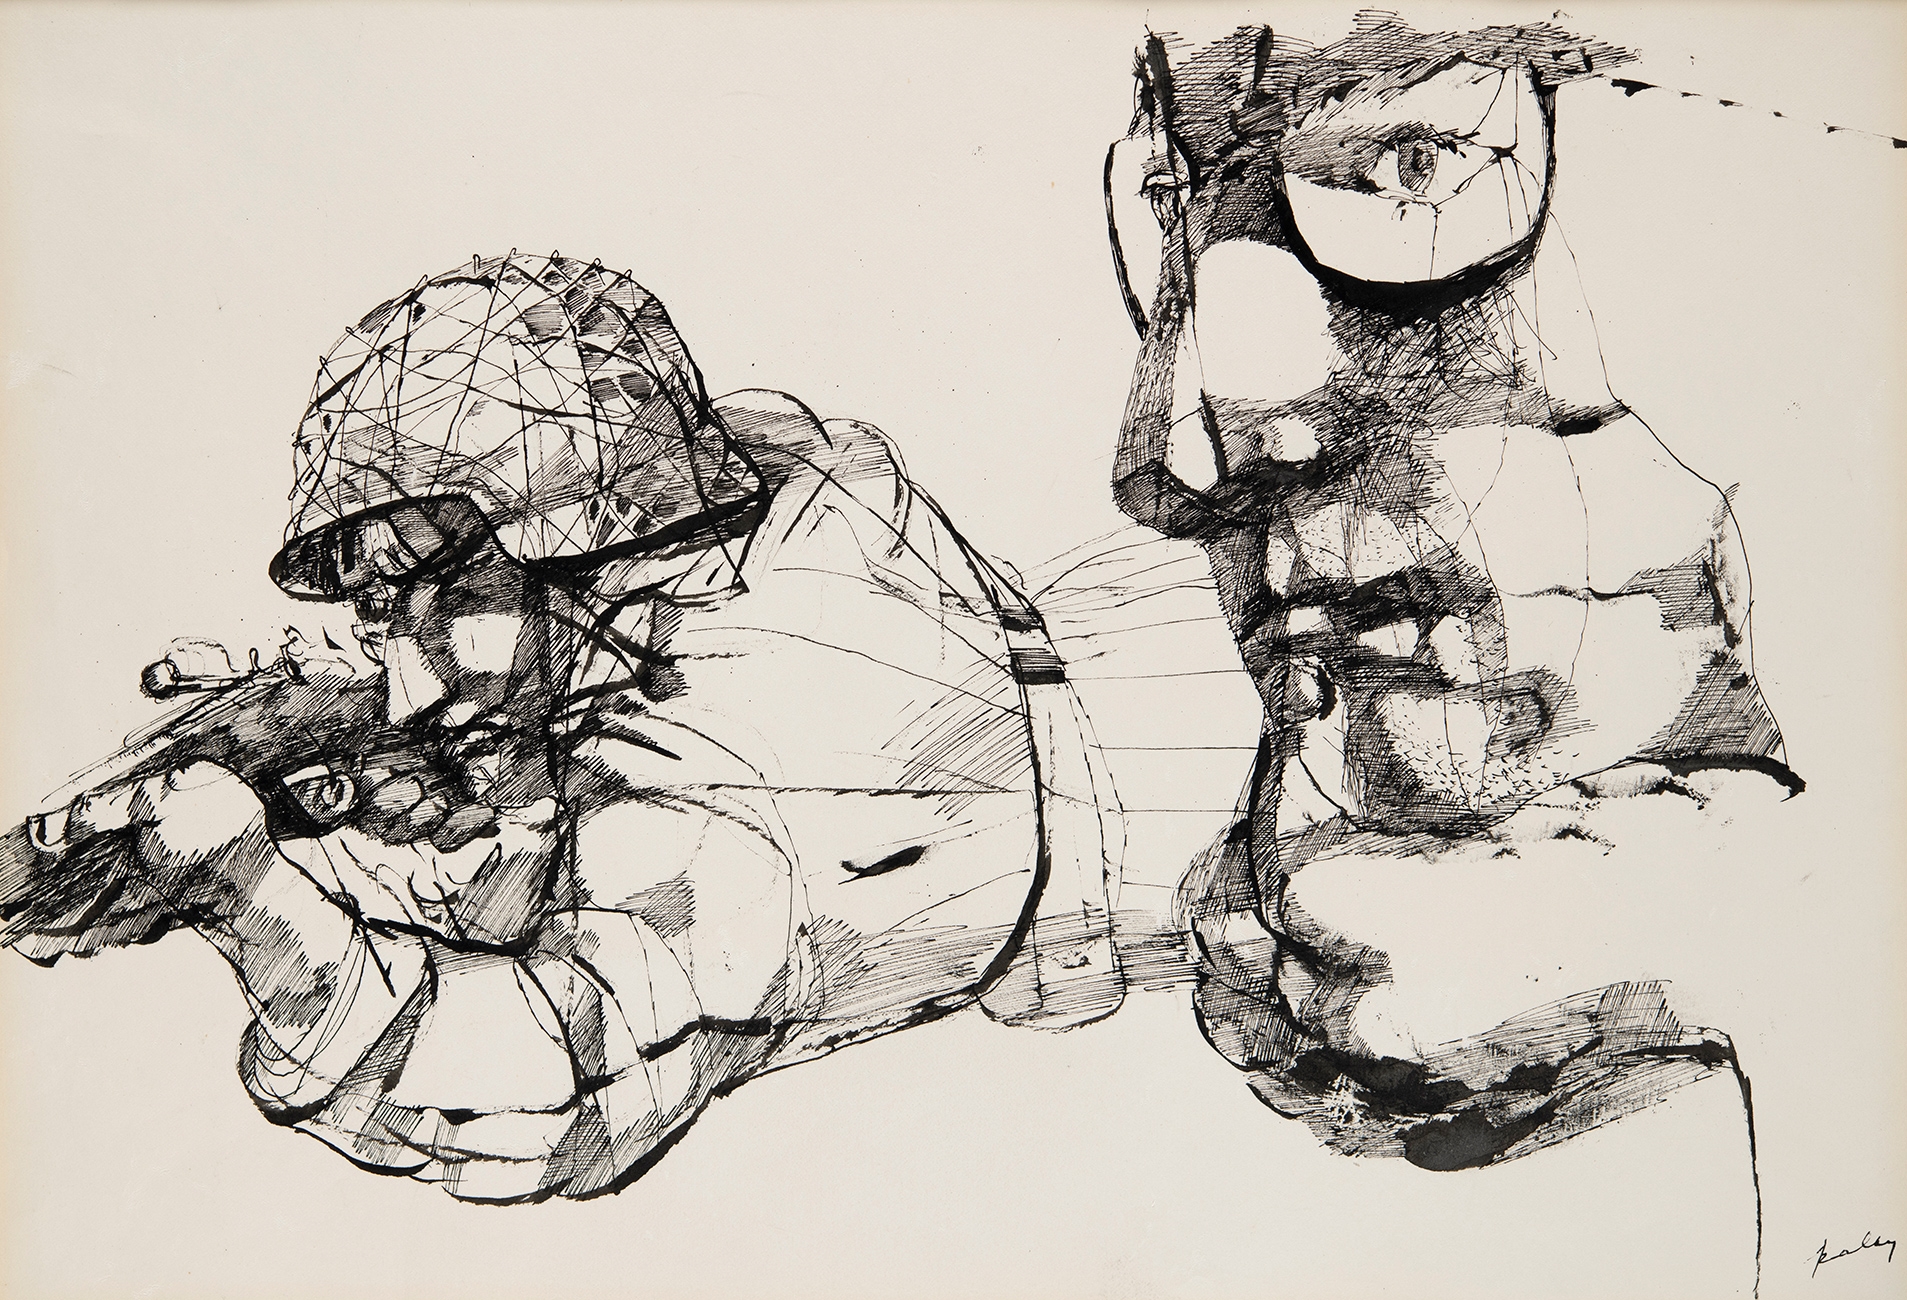 Artwork by Lajos Szalay, War Correspondent, Made of Ink on paper